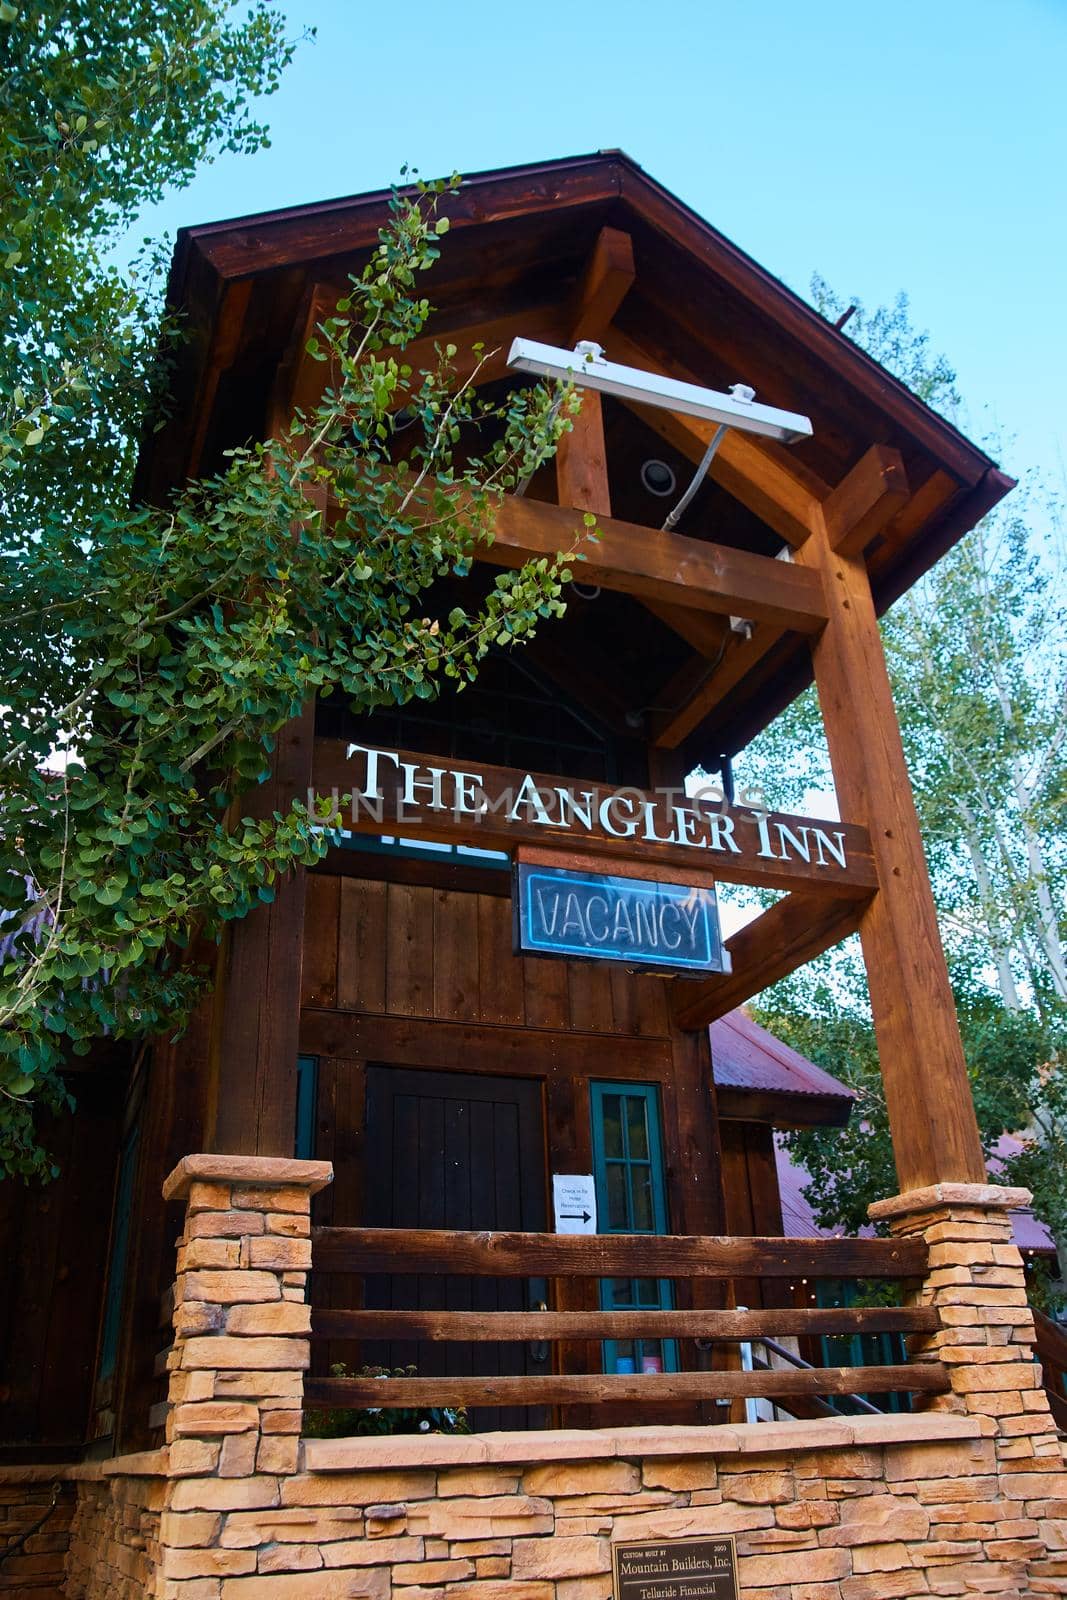 The Angler Inn hotel log cabin in the mountains by njproductions